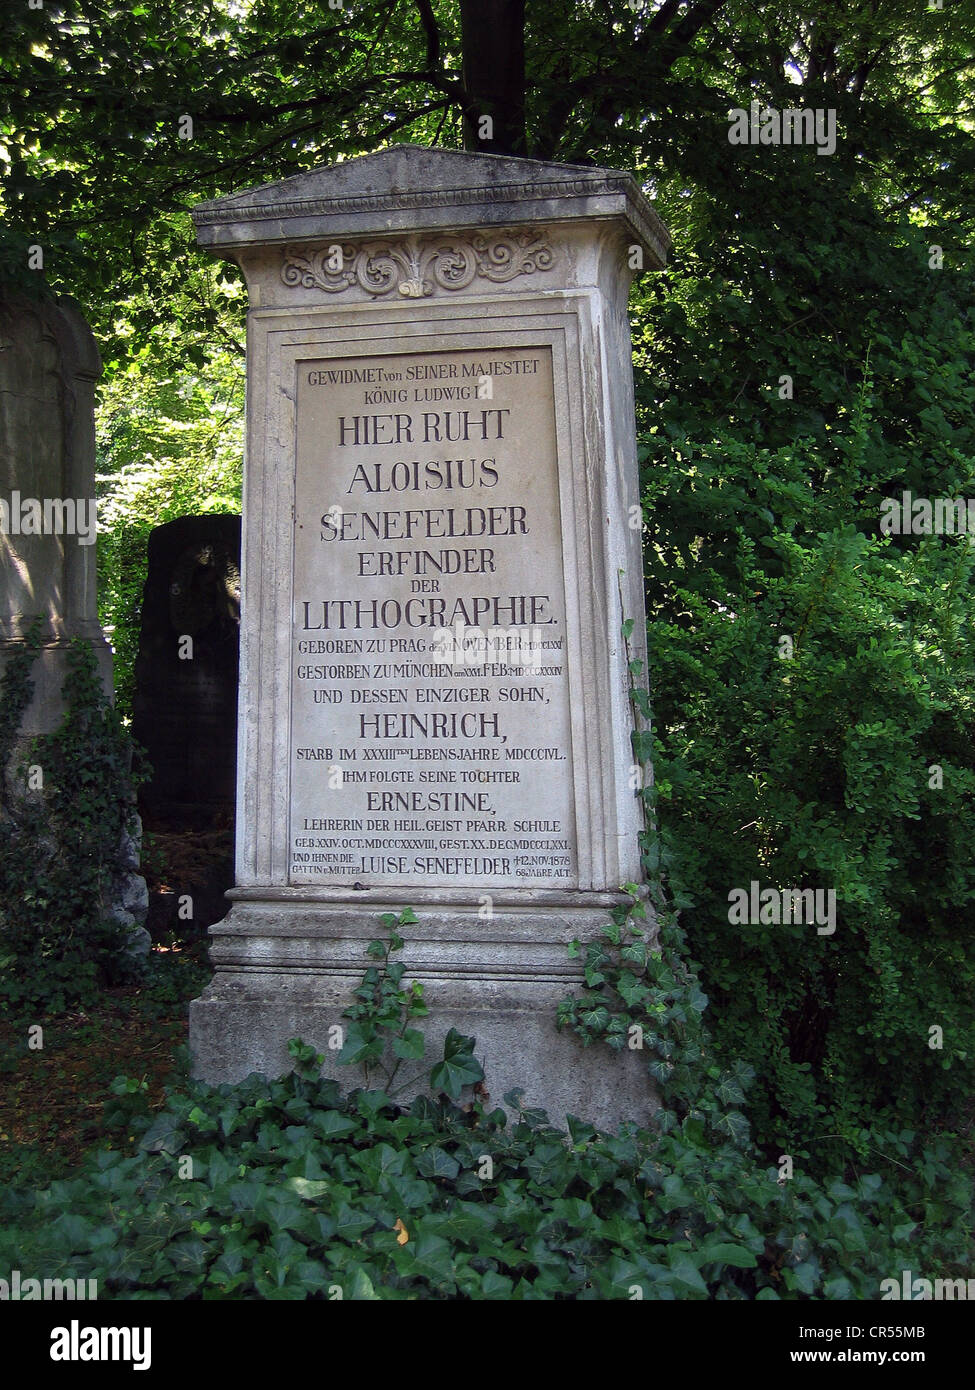 Senefelder, Alois, 6.11.1771 - 26.2.1834, Austrian actor, inventor of the the printing technique of lithography in 1796, his grave on the Southern Cemetery, Munich, Germany, Stock Photo